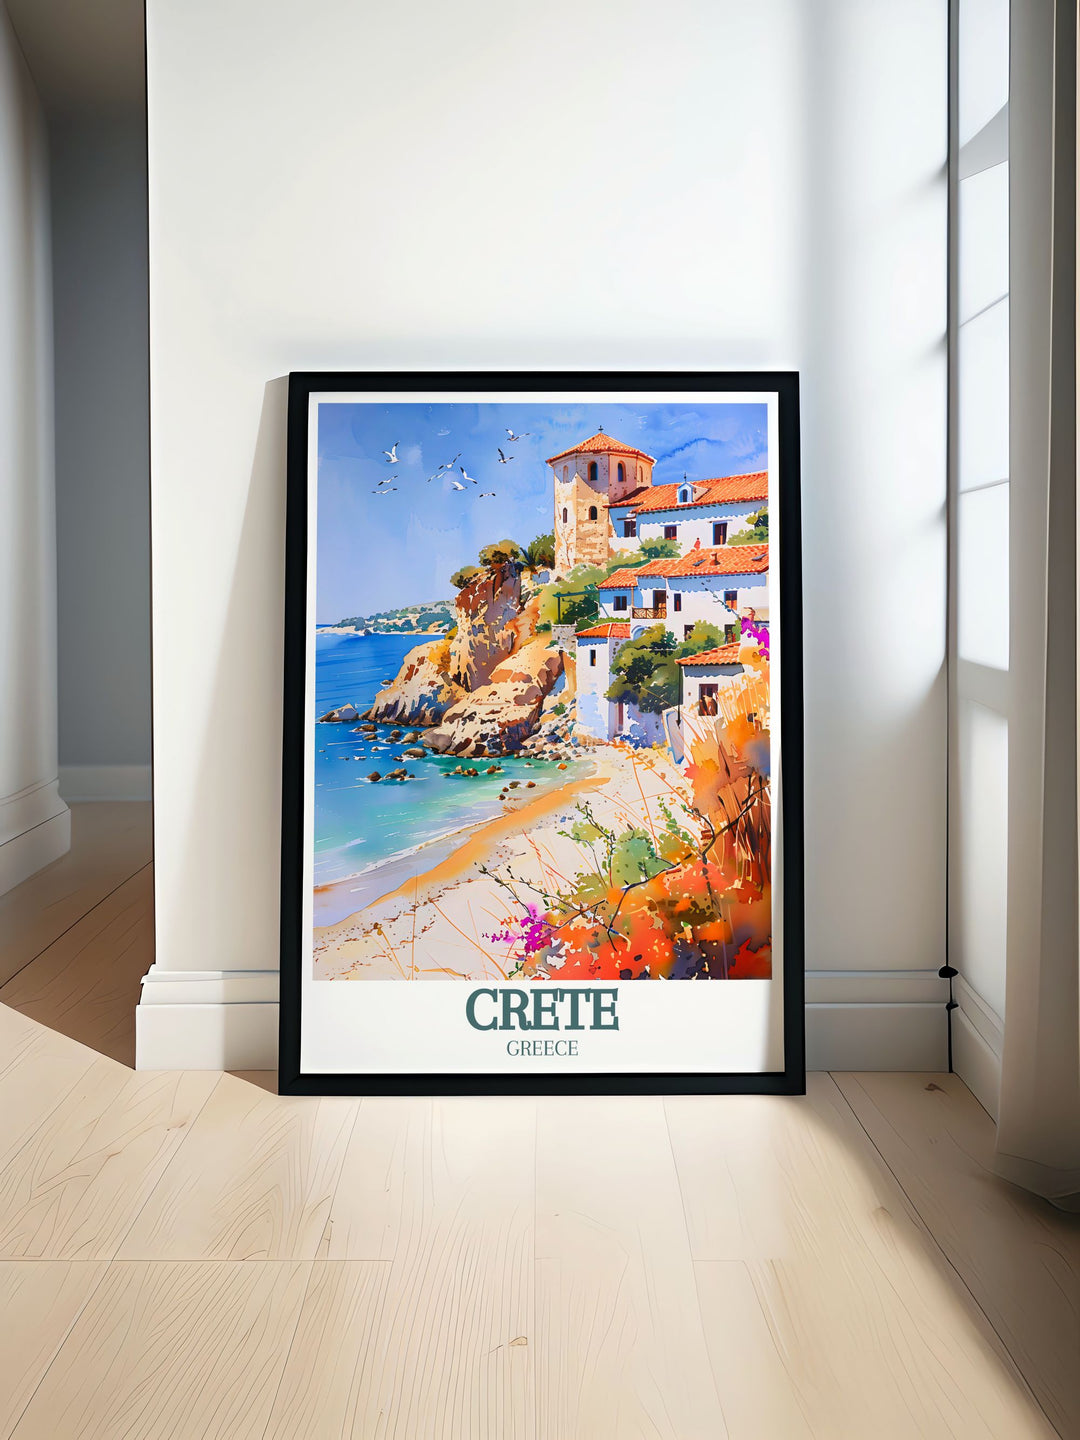 Celebrate the natural beauty of Elafonissi Beach with this high quality art print. Featuring the pristine lagoon and pink sands, this travel poster brings a piece of Cretes coastal paradise into your home, ideal for enhancing your decor or gifting to beach lovers.